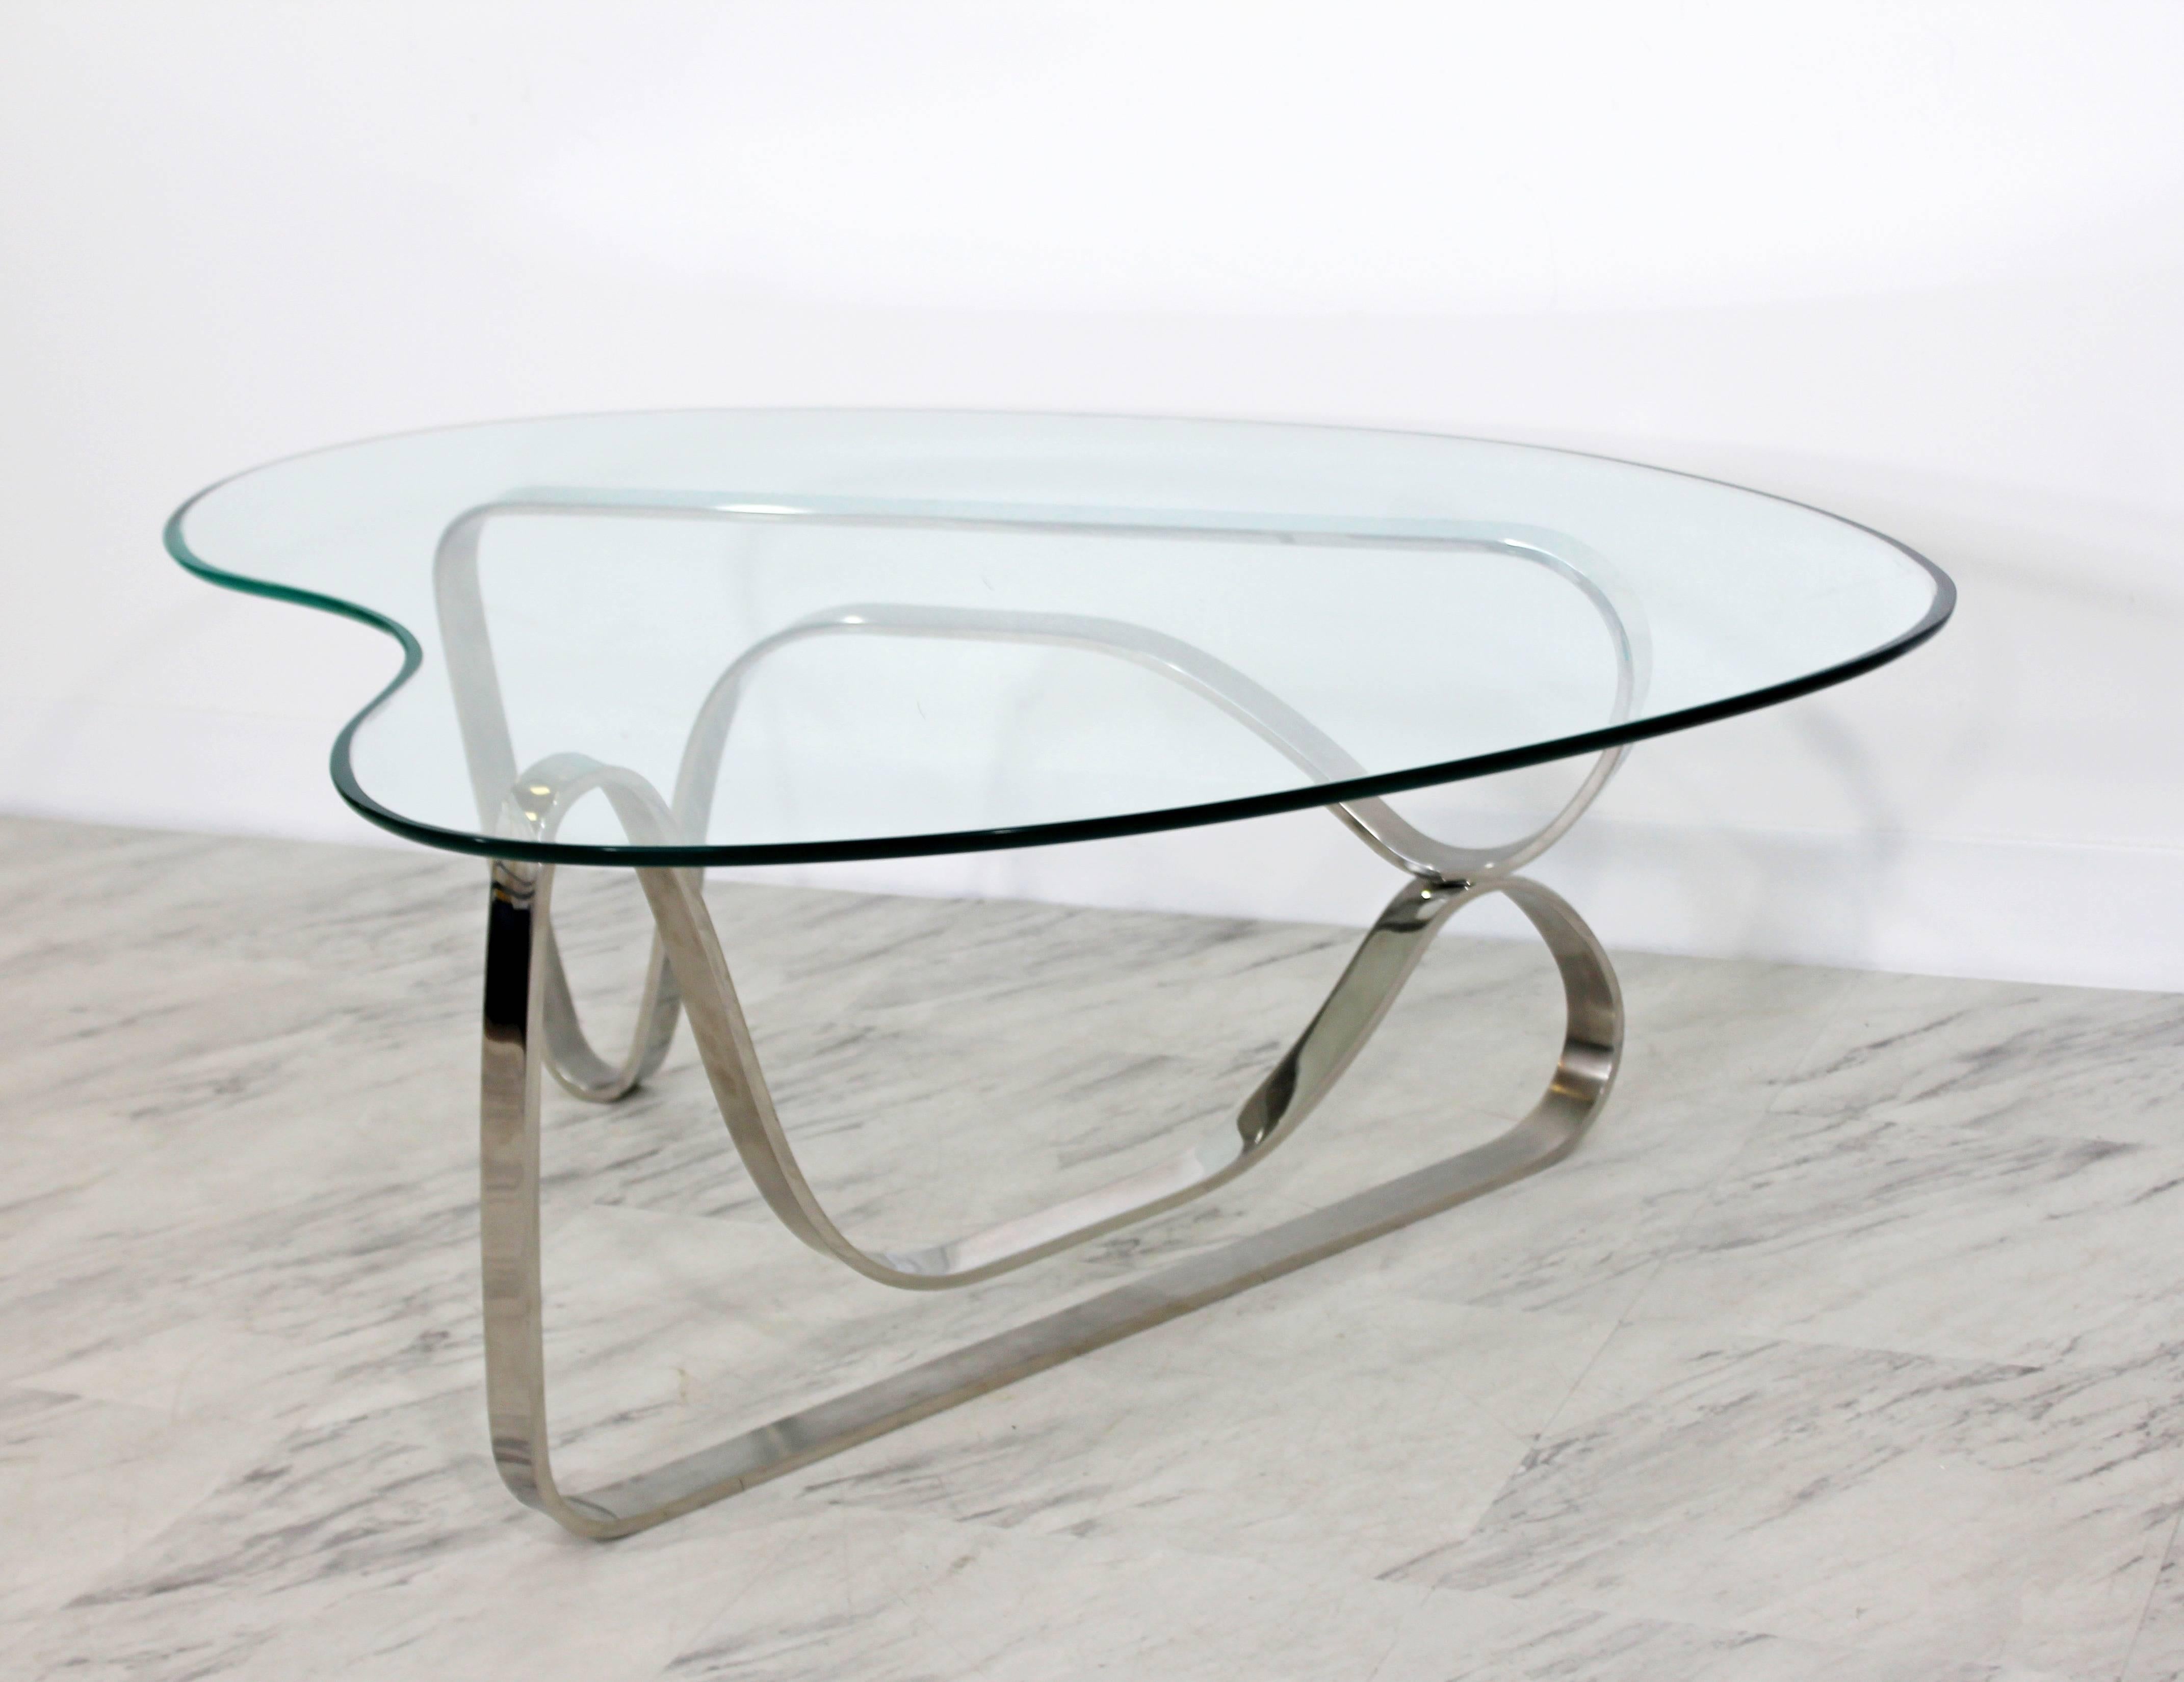 Late 20th Century Mid-Century Modern Sculptural Chrome Kidney Glass Coffee Table Pace Era, 1970s